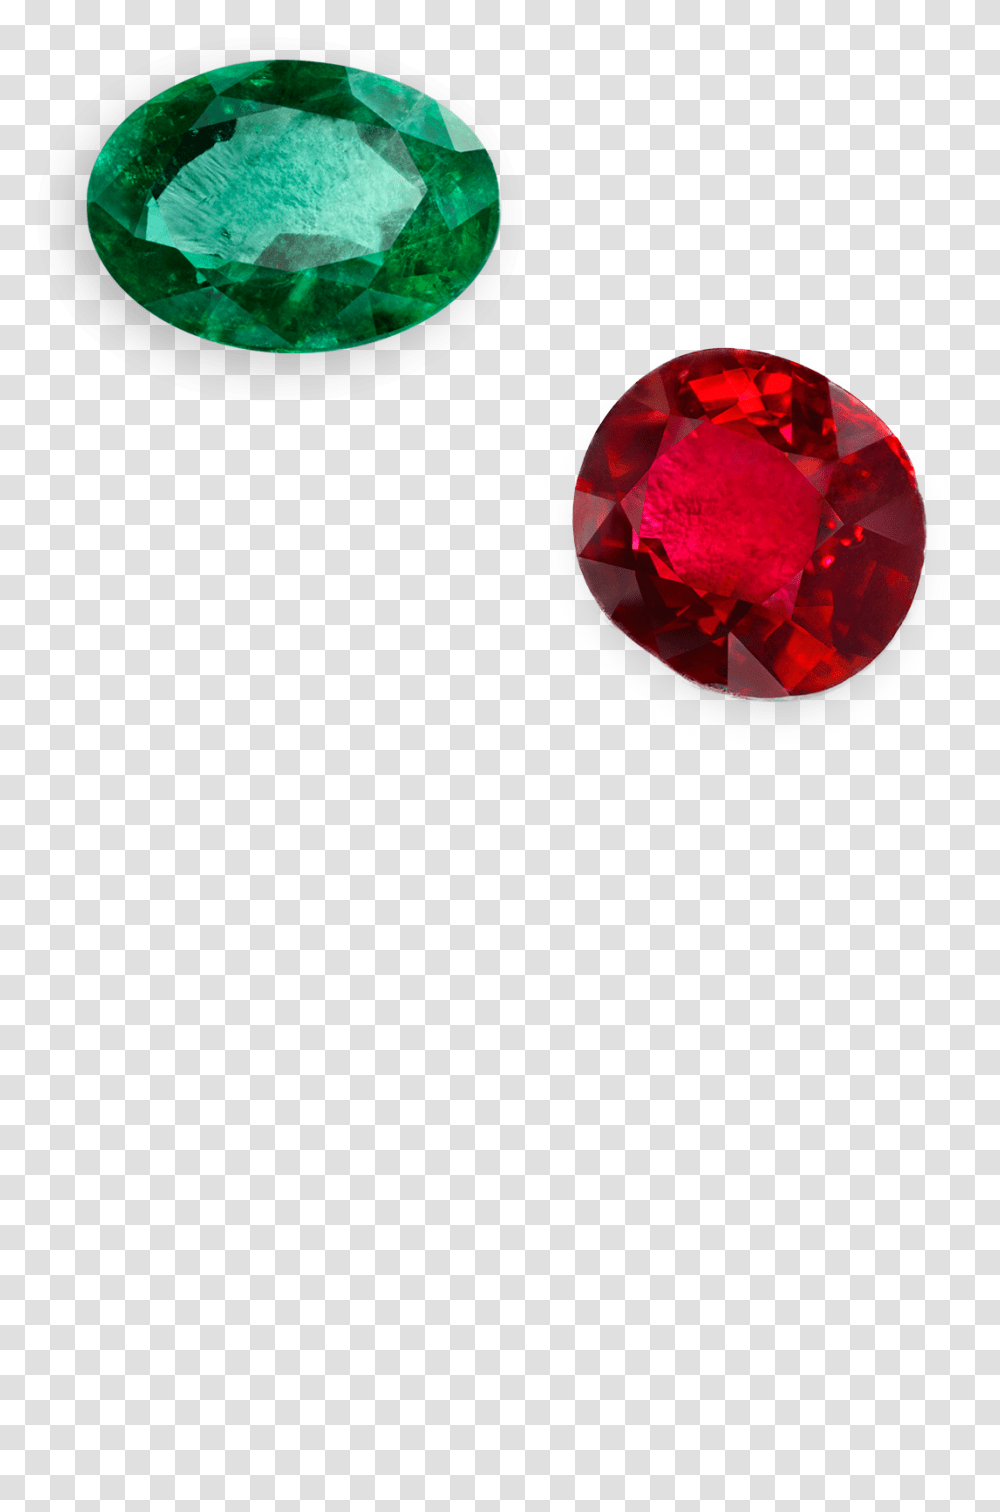 Emeralds And Rubies Emerald, Gemstone, Jewelry, Accessories, Accessory Transparent Png